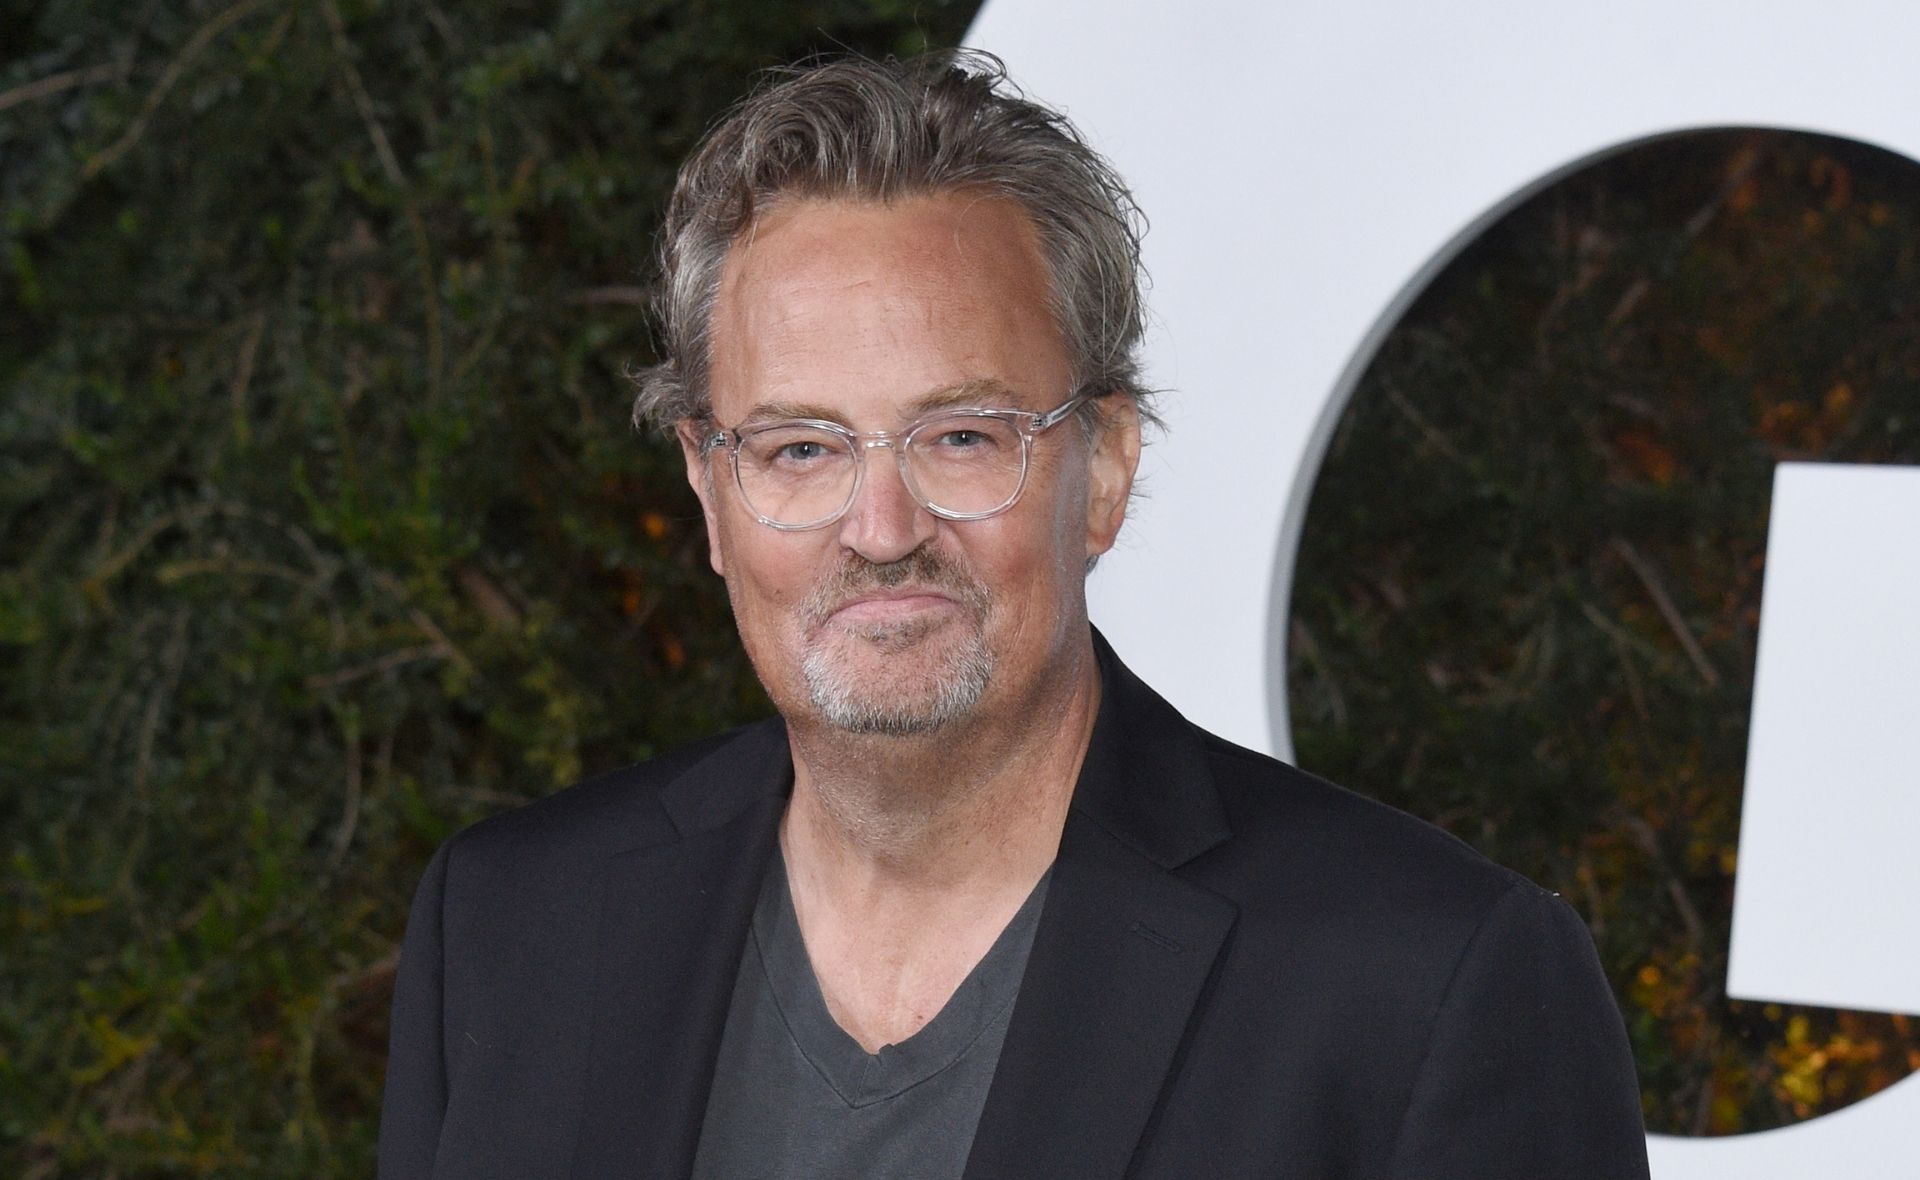 Farewell Chandler Bing: Remembering Matthew Perry and all his amazing work